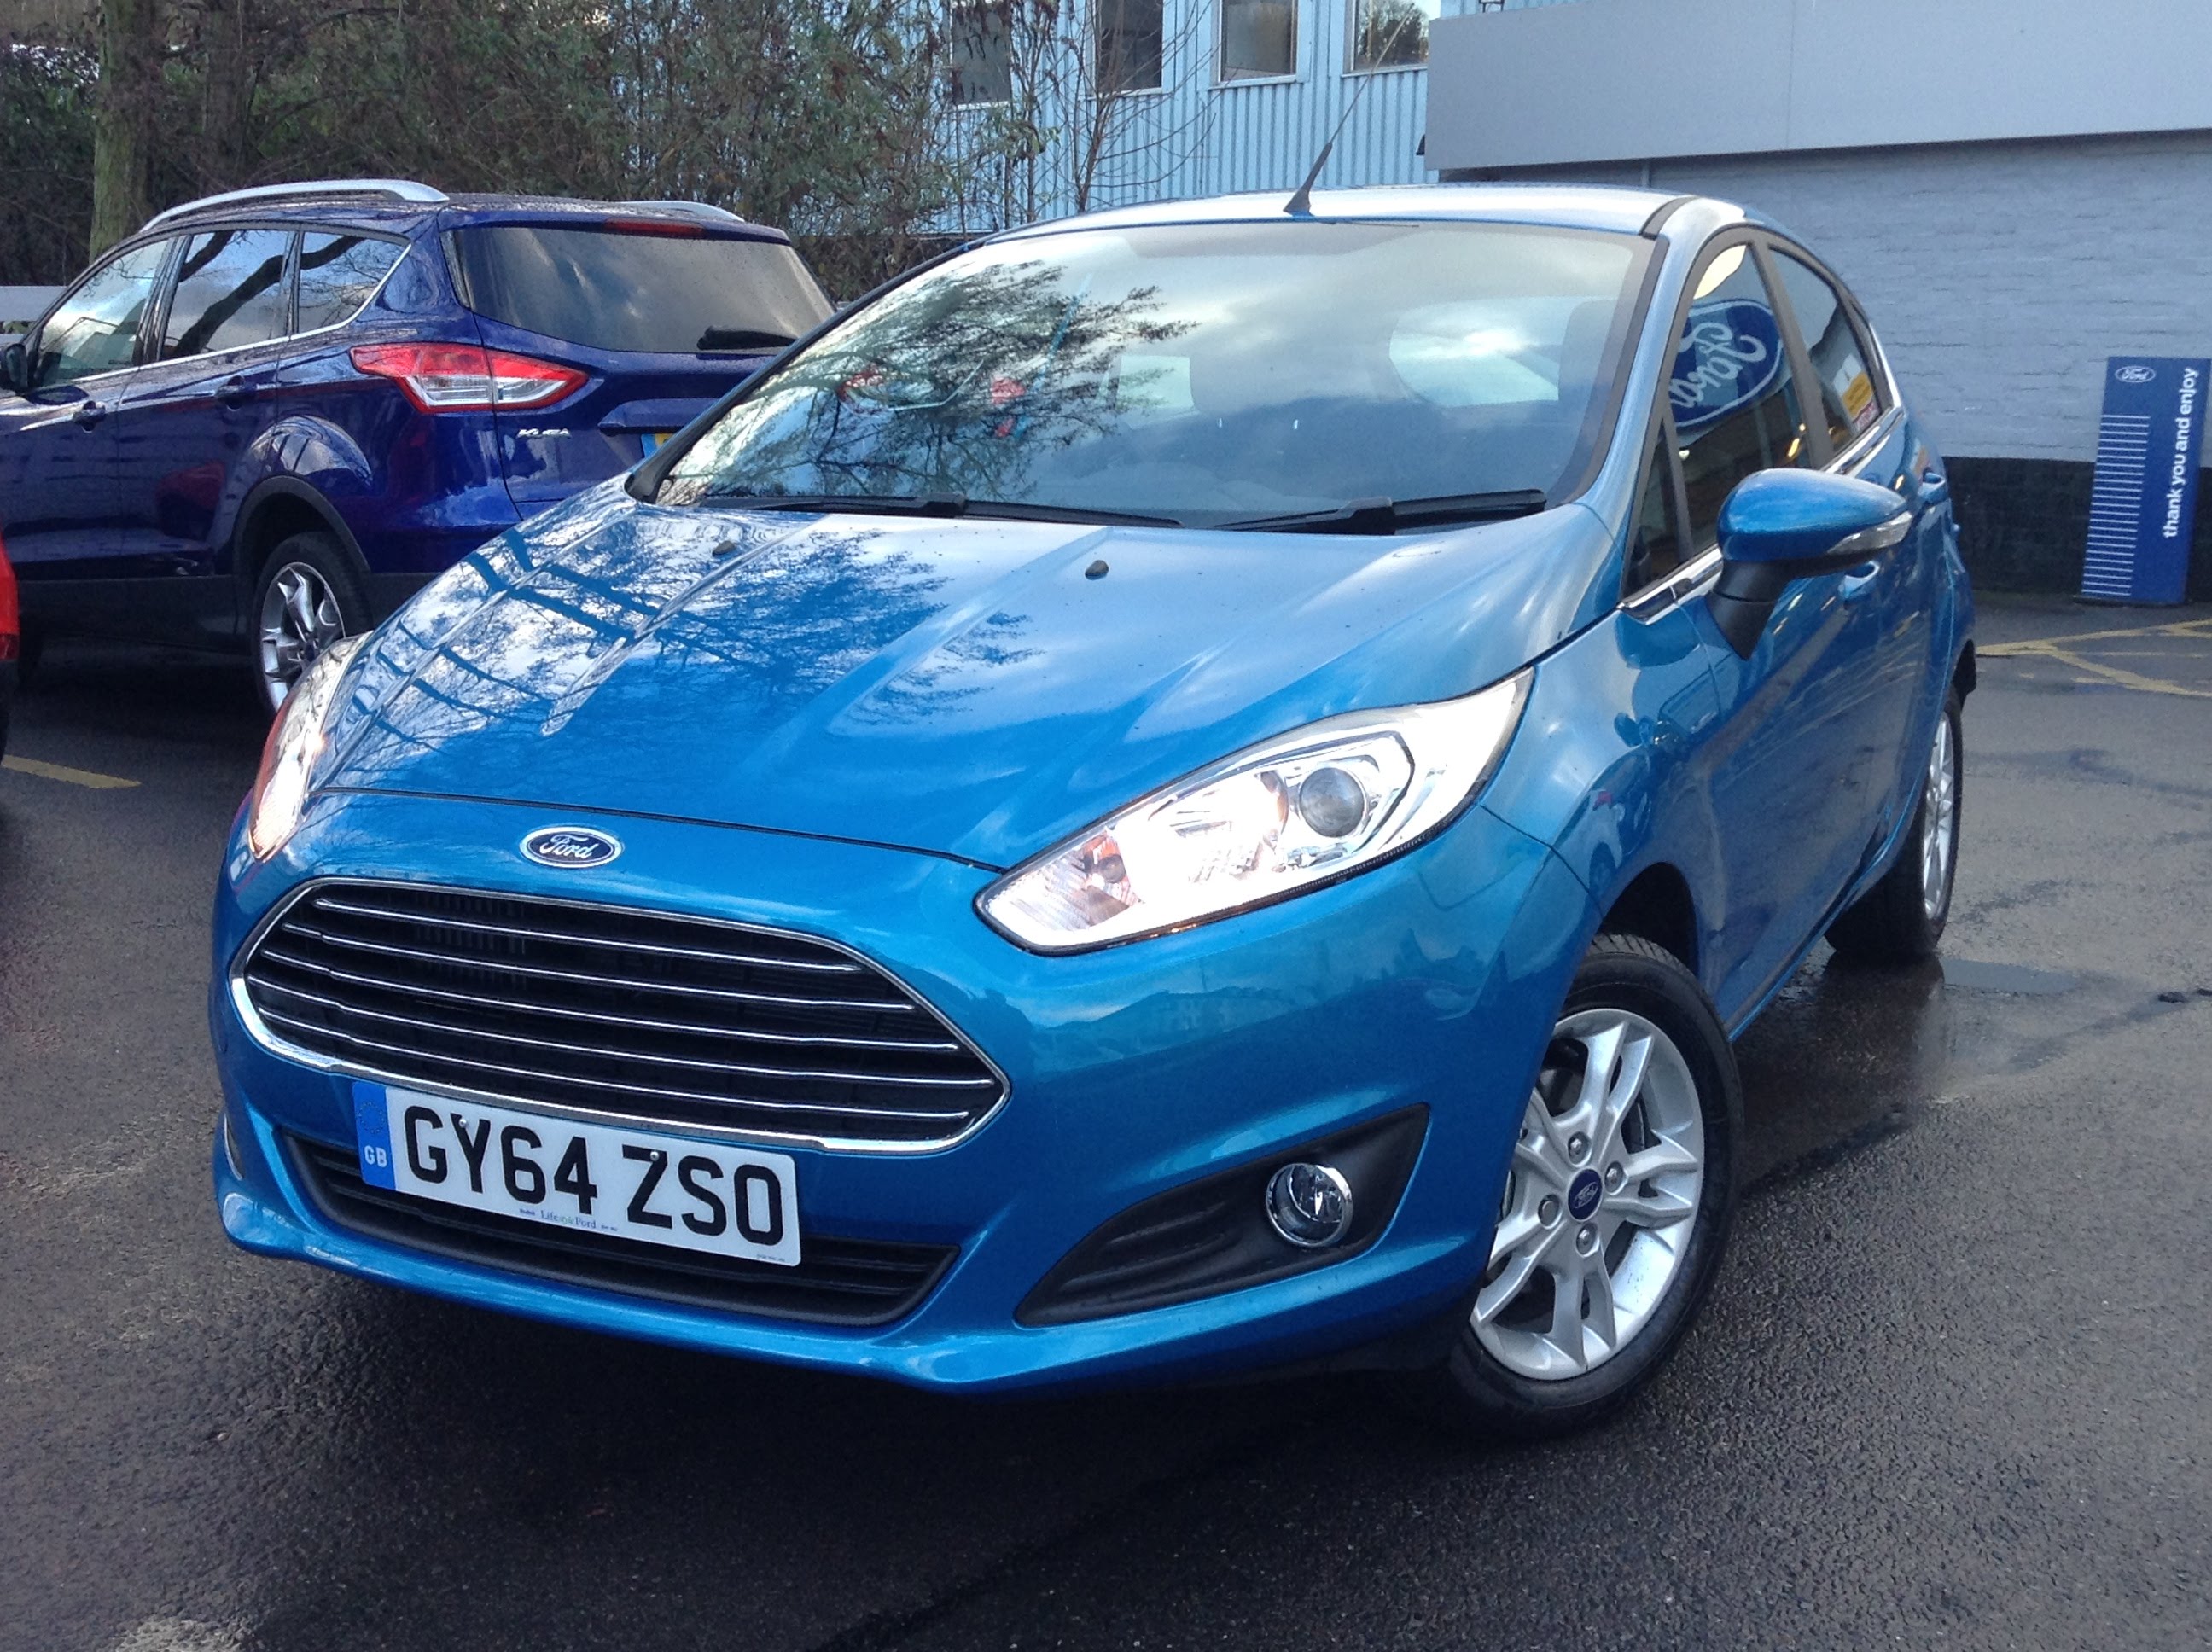 Ford Fiesta 1.0 Zetec 5dr 100PS in Candy Blue 2014 For Sale at ...